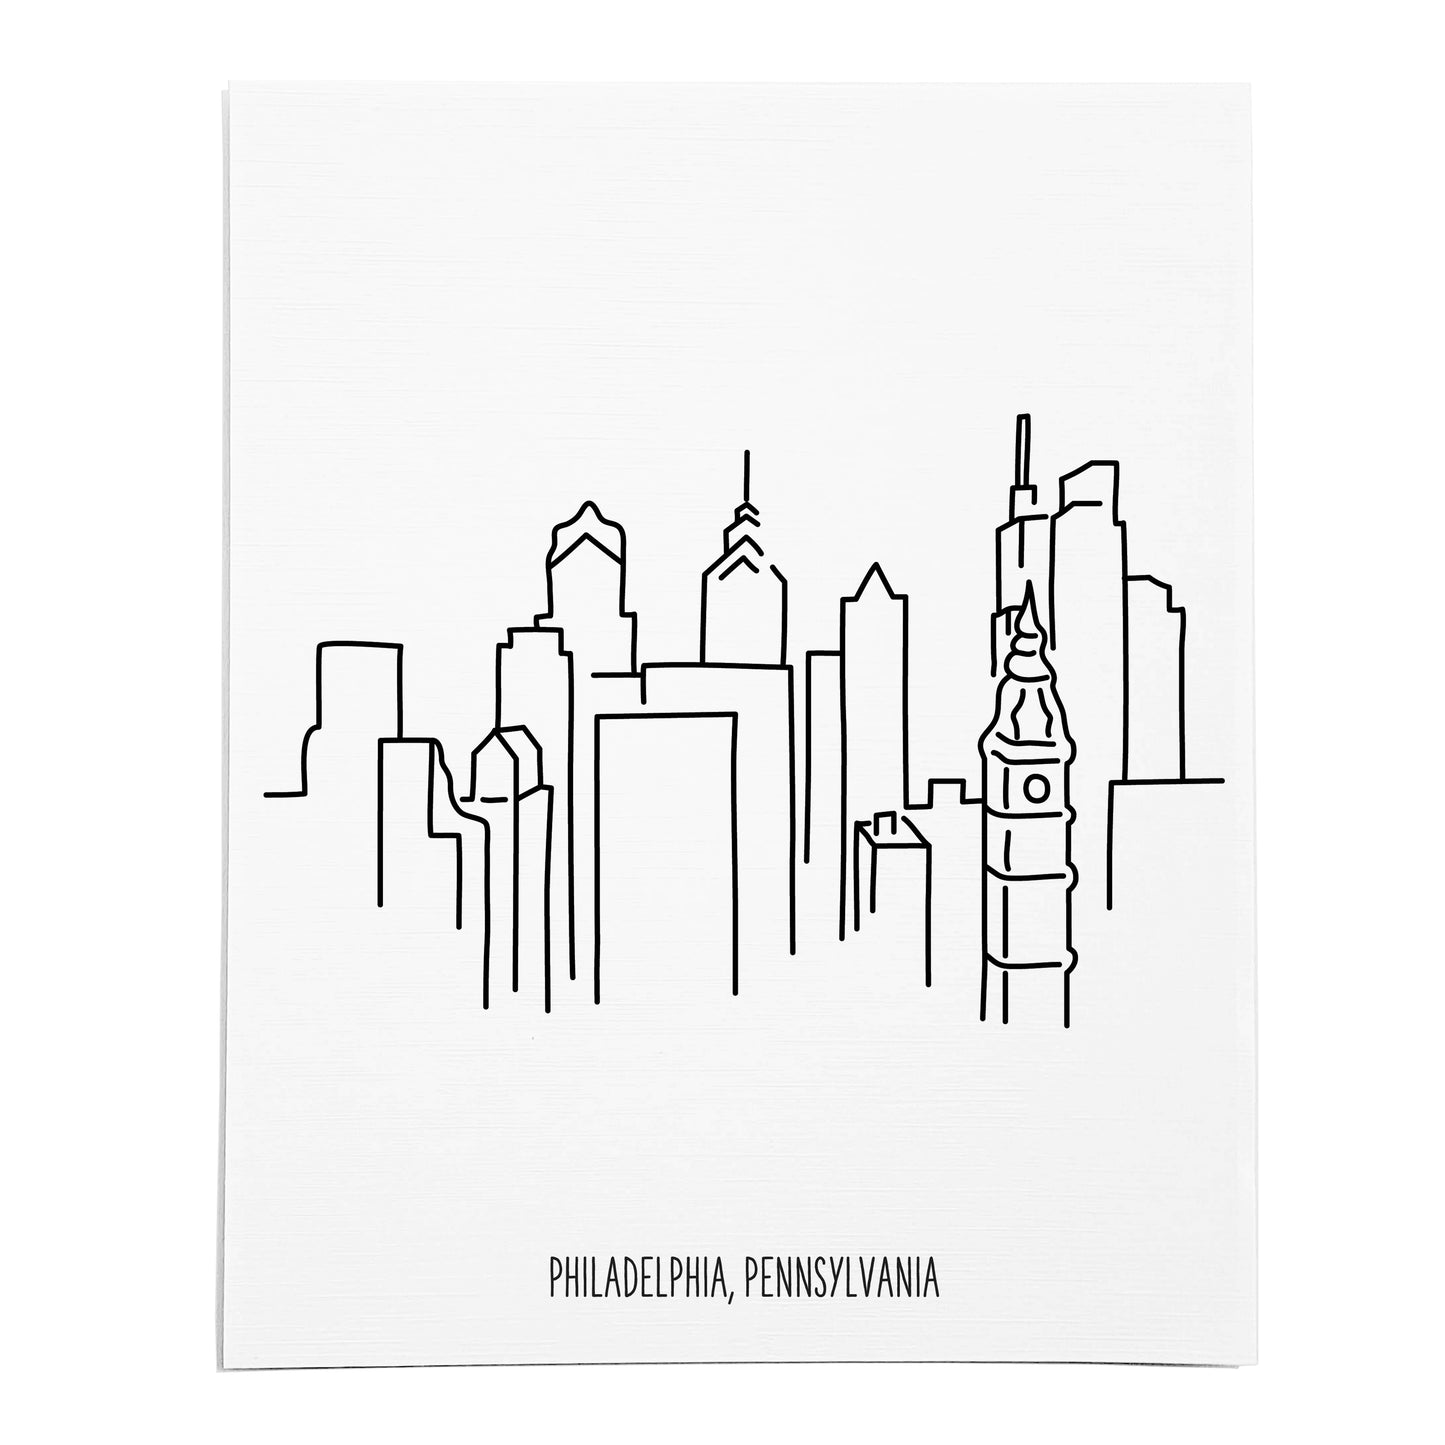 An art print featuring a line drawing of the Philadelphia Skyline on white linen paper